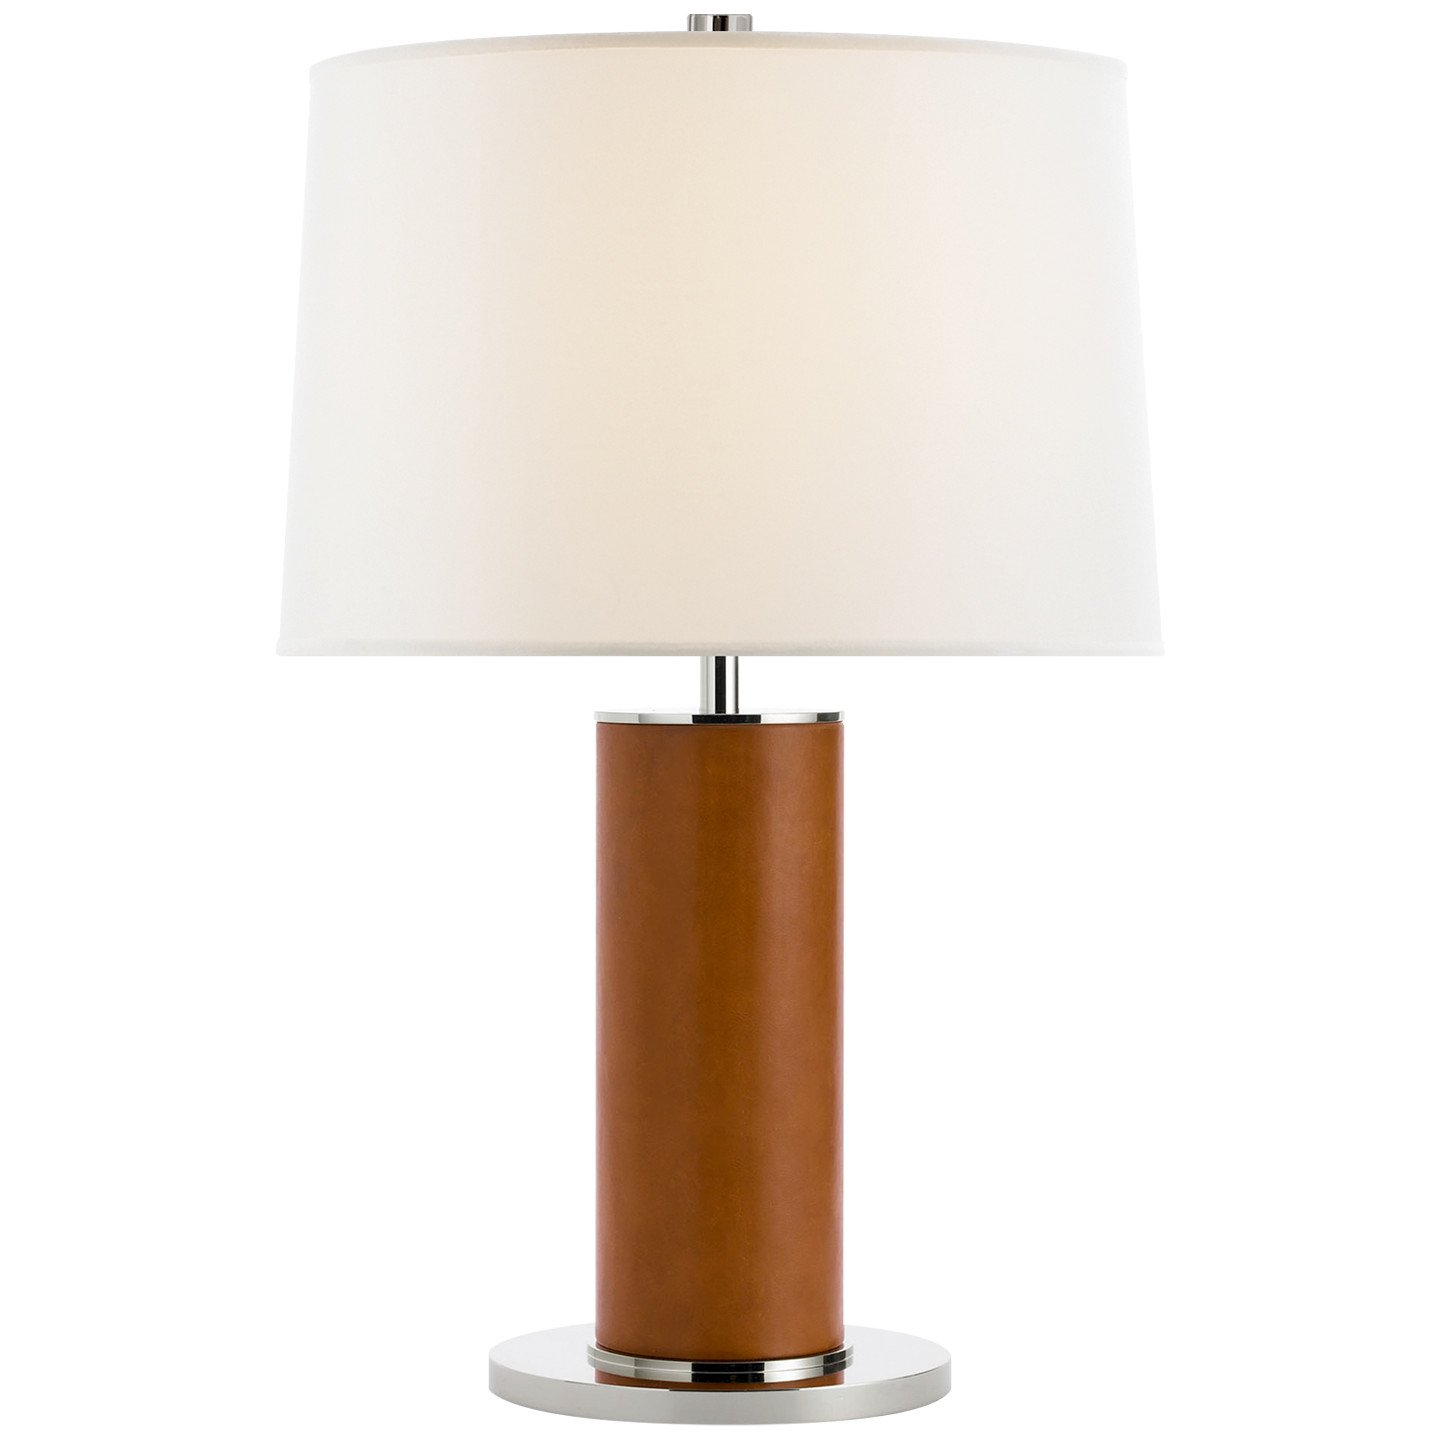 Beckford Table Lamp Saddle Leather